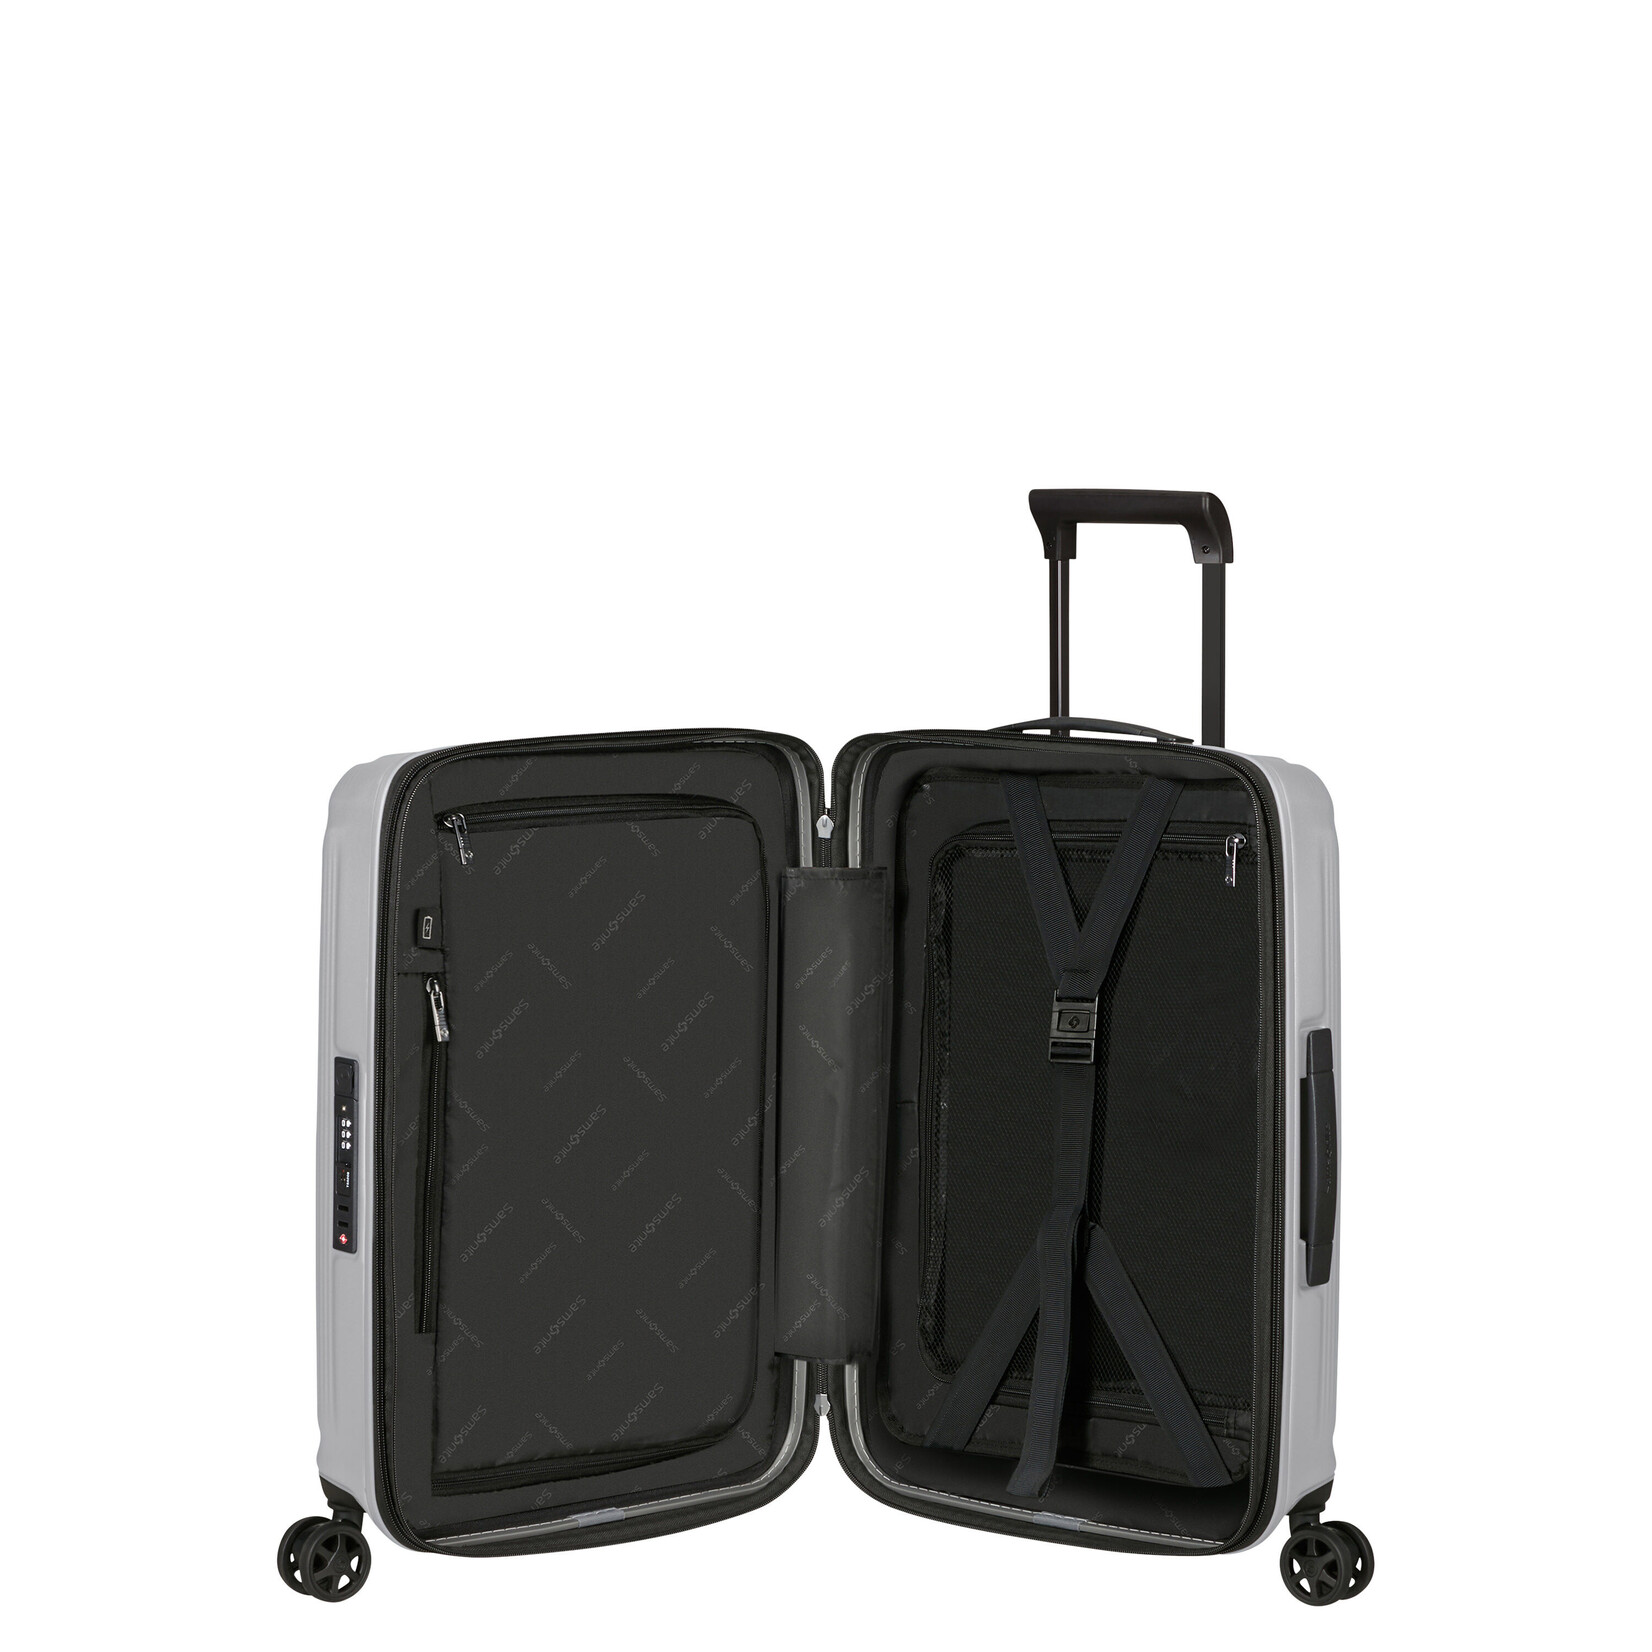 SAMSONITE CANADA NUON CARRY-ON SPINNER